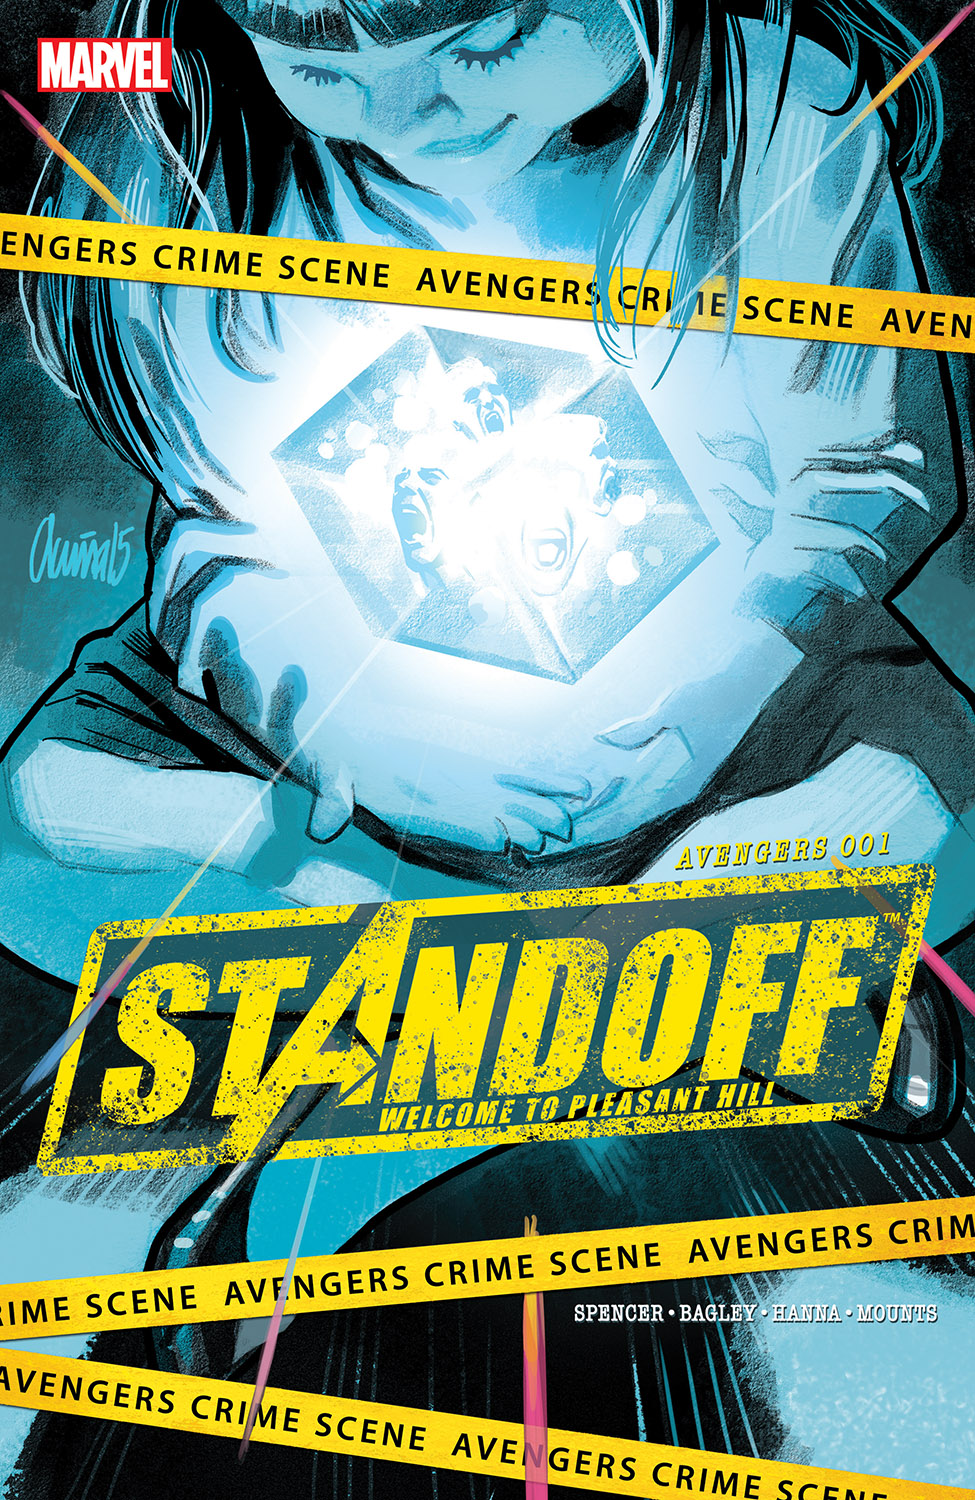 Avengers Standoff: Welcome to Pleasant Hill (2016) #1